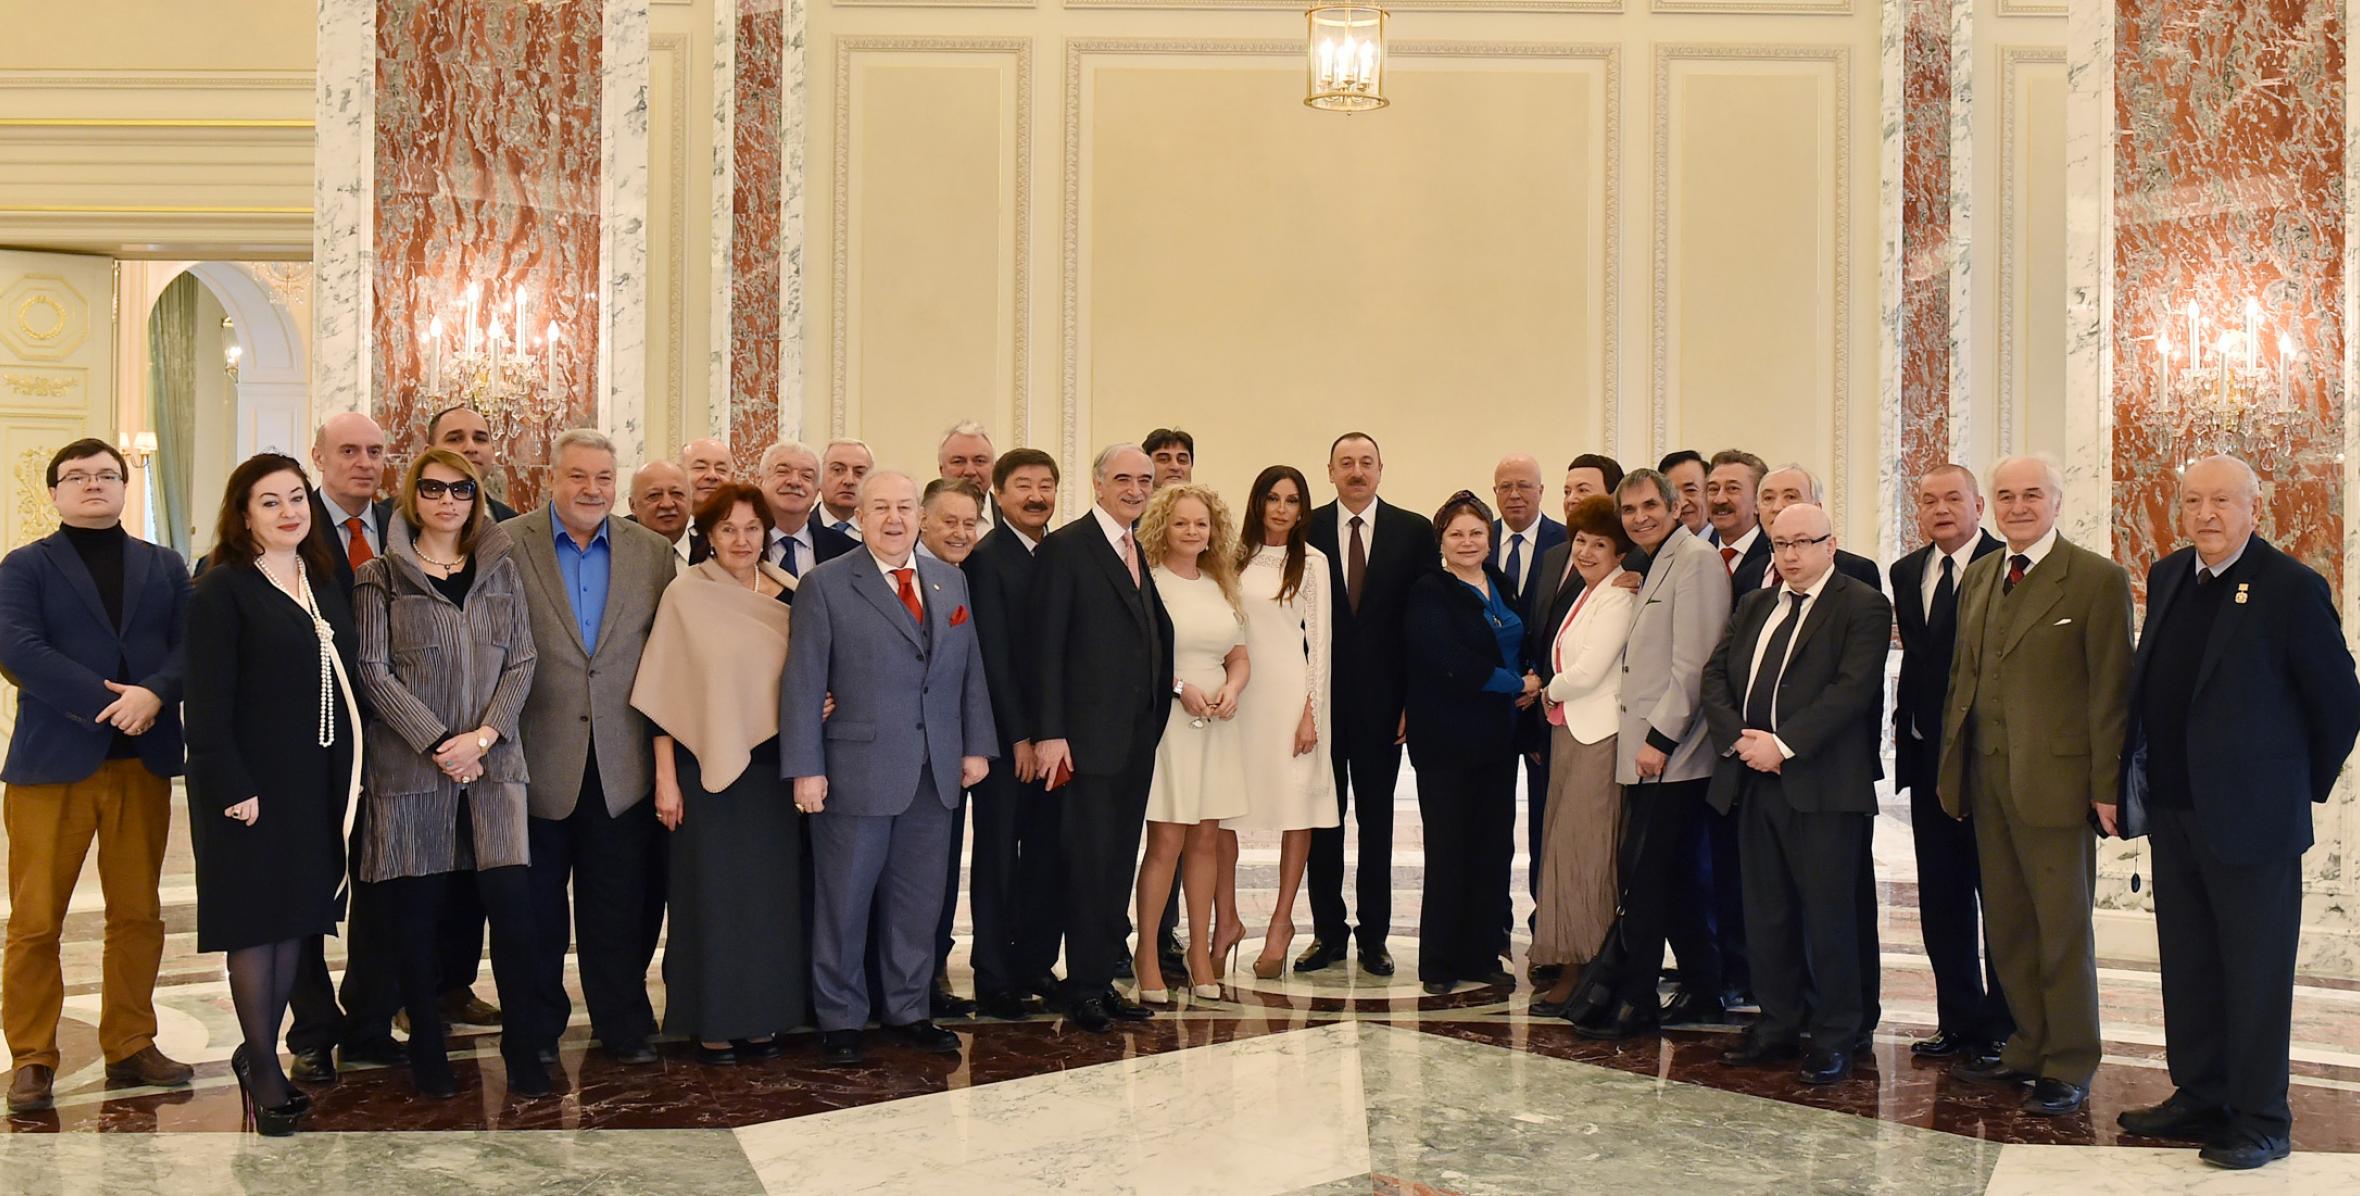 Ilham Aliyev met with a group of prominent culture and art figures who arrived in Baku to attend the 70th anniversary ceremony of People`s Artist Polad Bulbuloglu